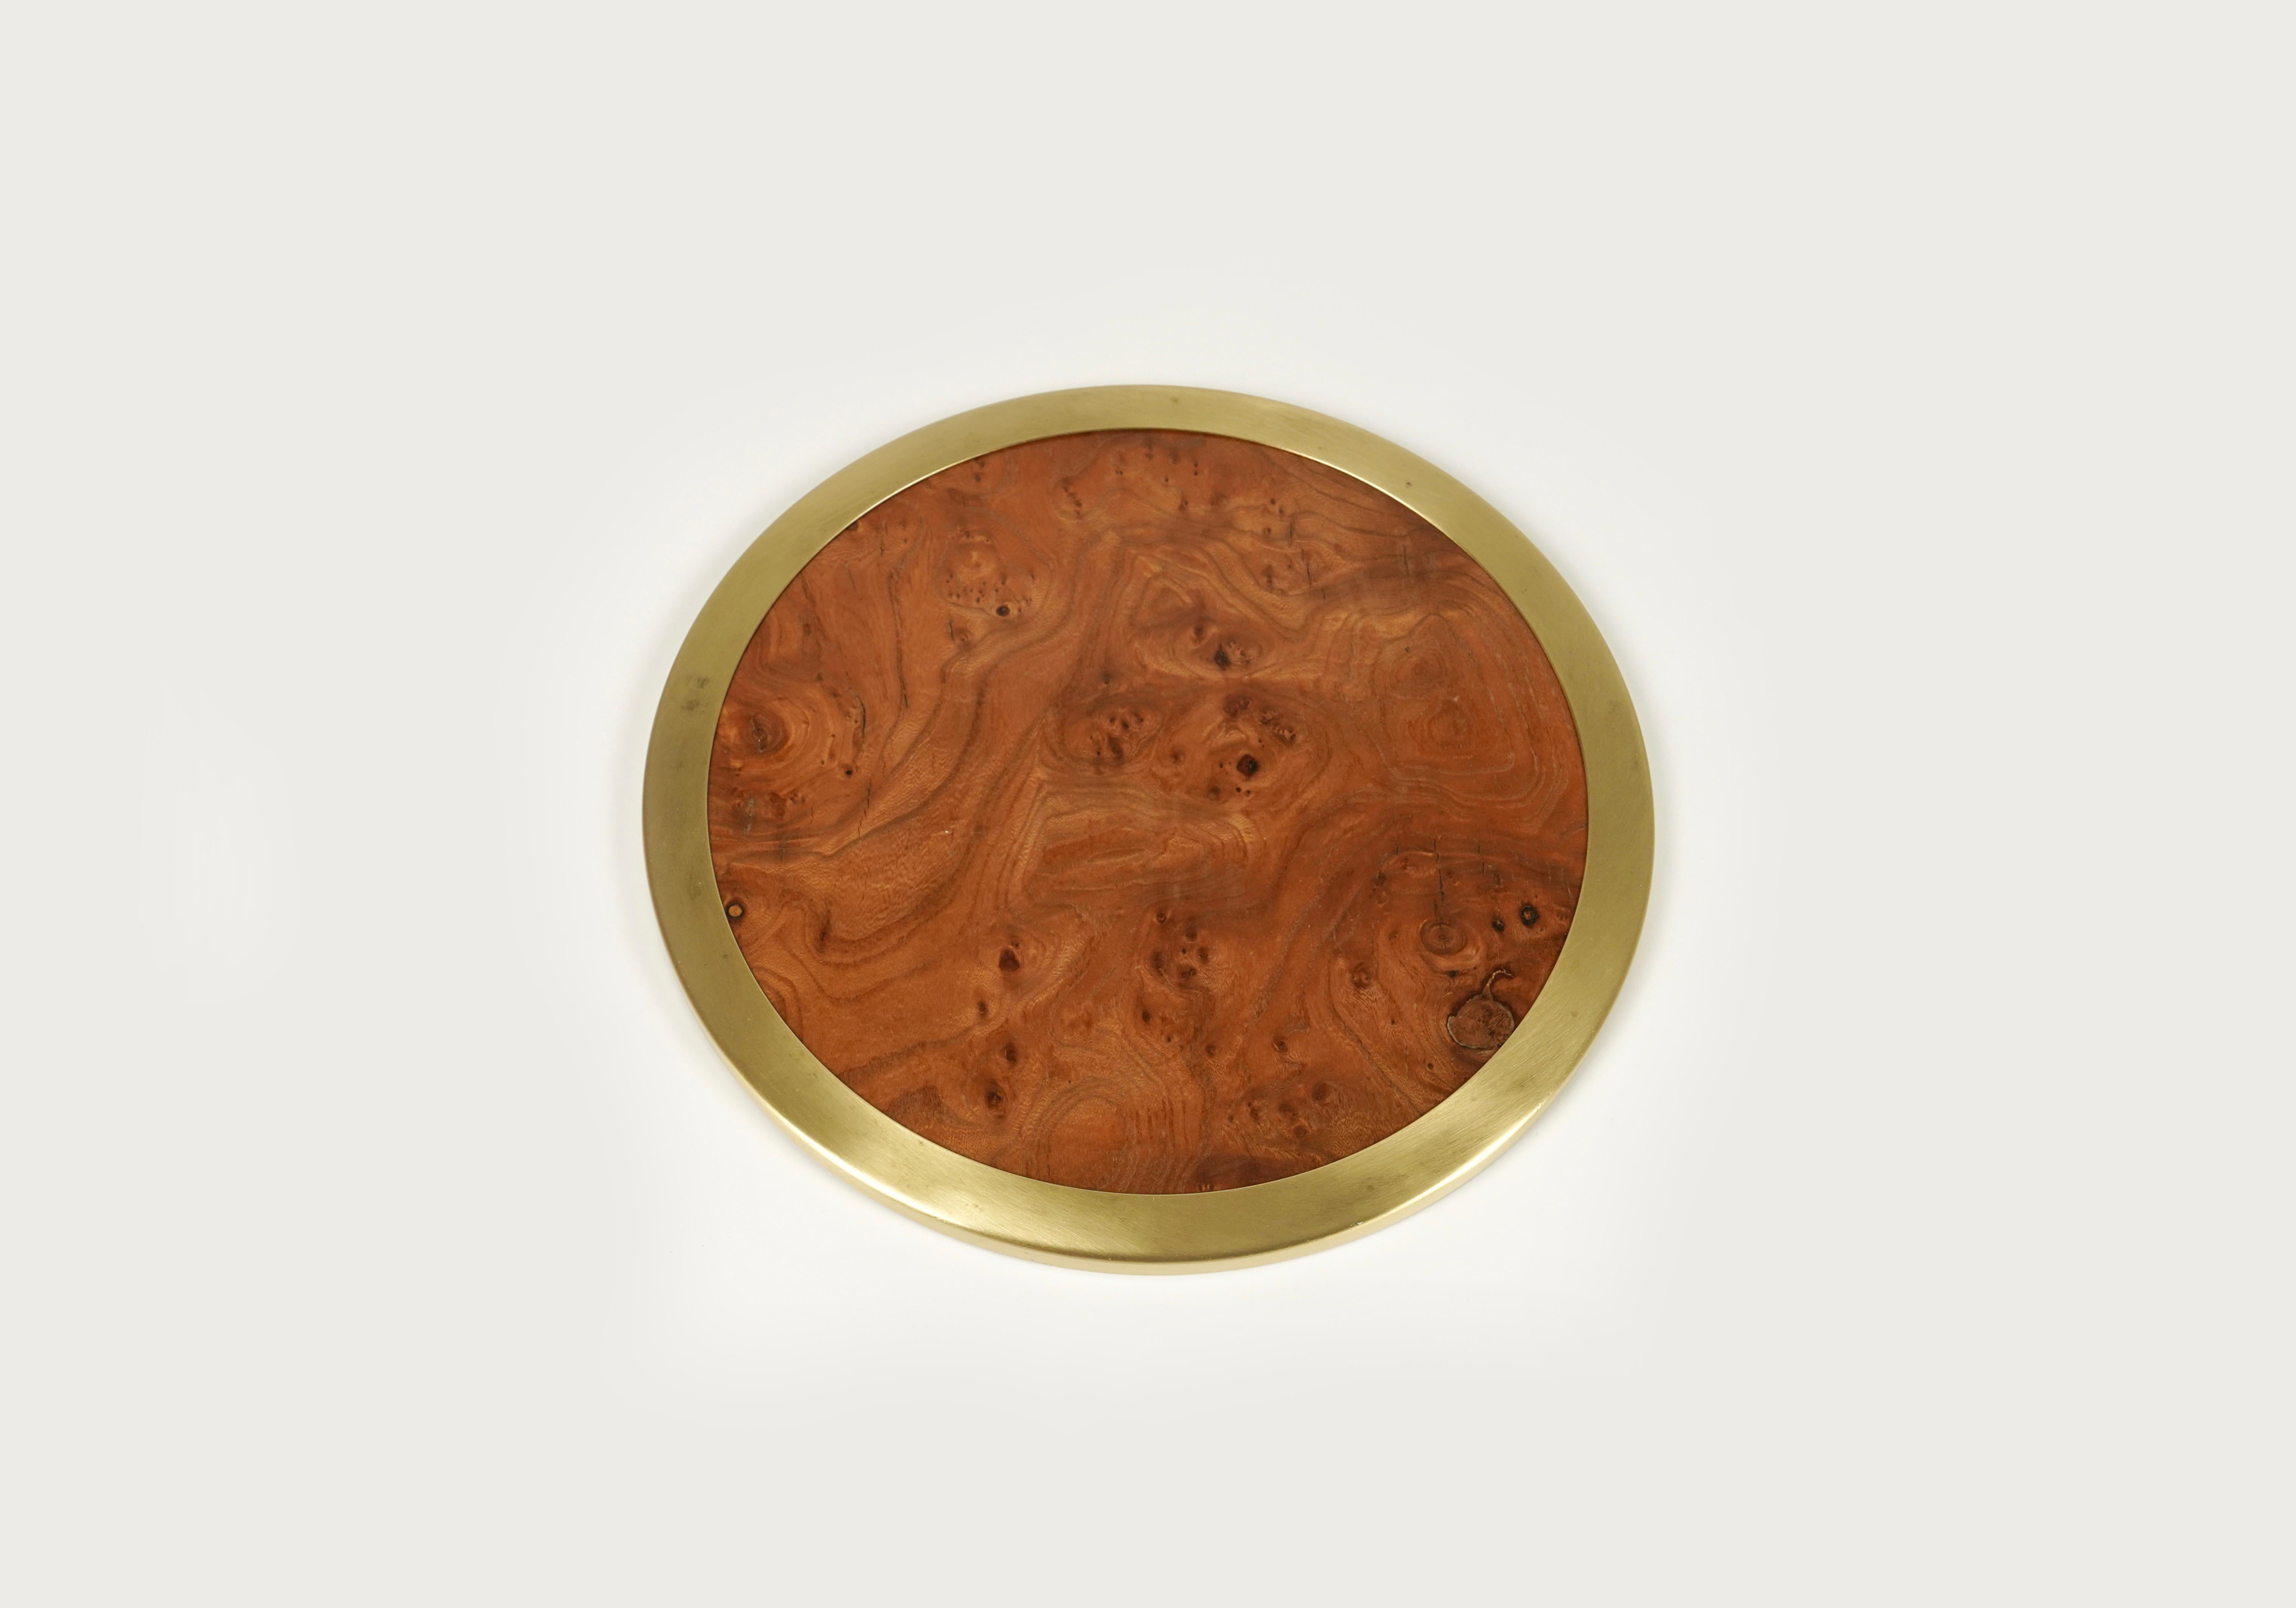 Mid-century round centerpiece or serving tray in wood and polished brass in the style of Willy Rizzo.

Made in Italy in the 1960s.

Wood and brass has been polished by a professional restorer.